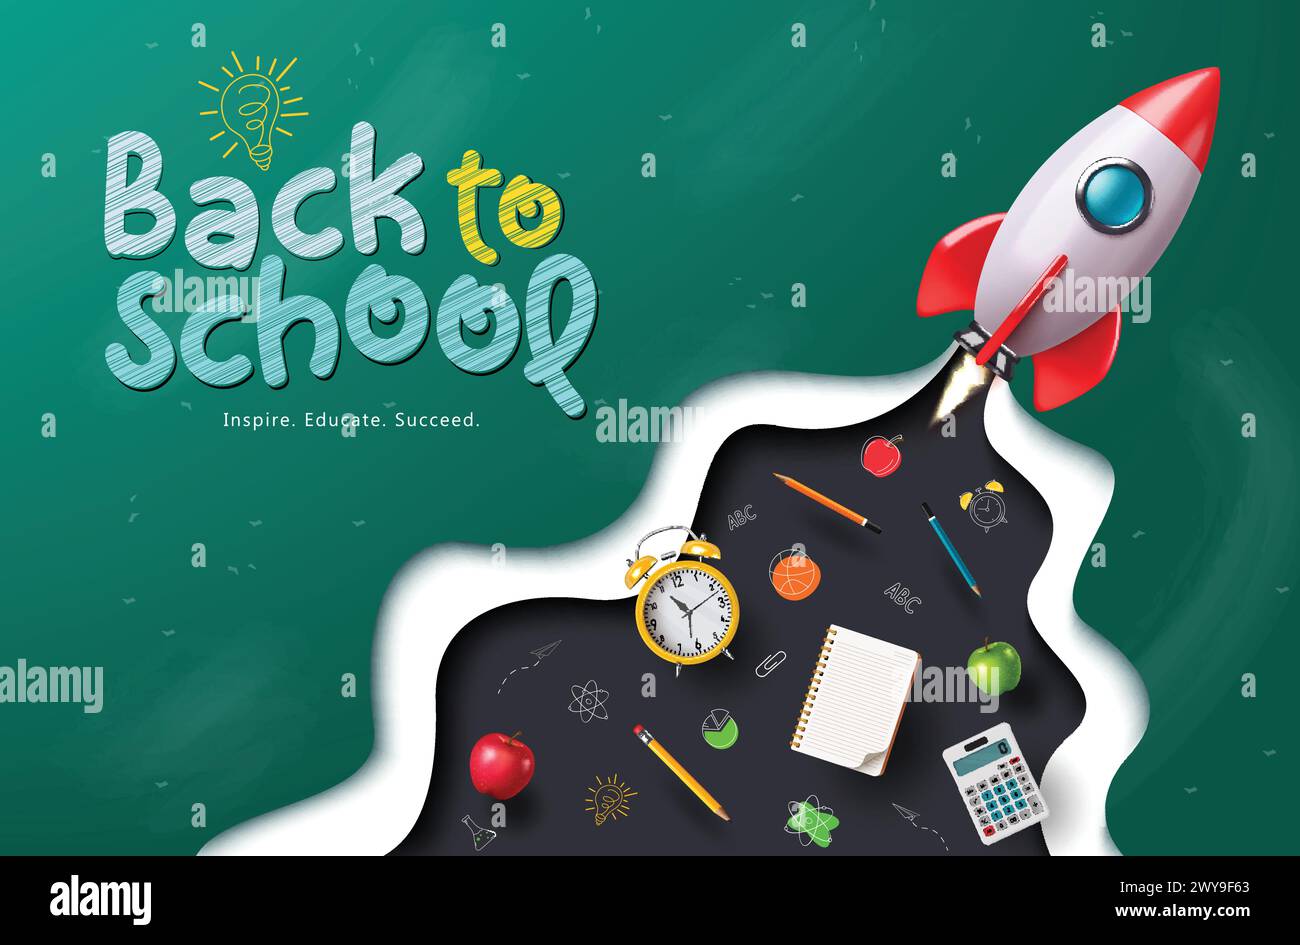 Back to school vector template design. Back to school greeting text in chalk board space with rocket ship launch element and educational supplies item Stock Vector